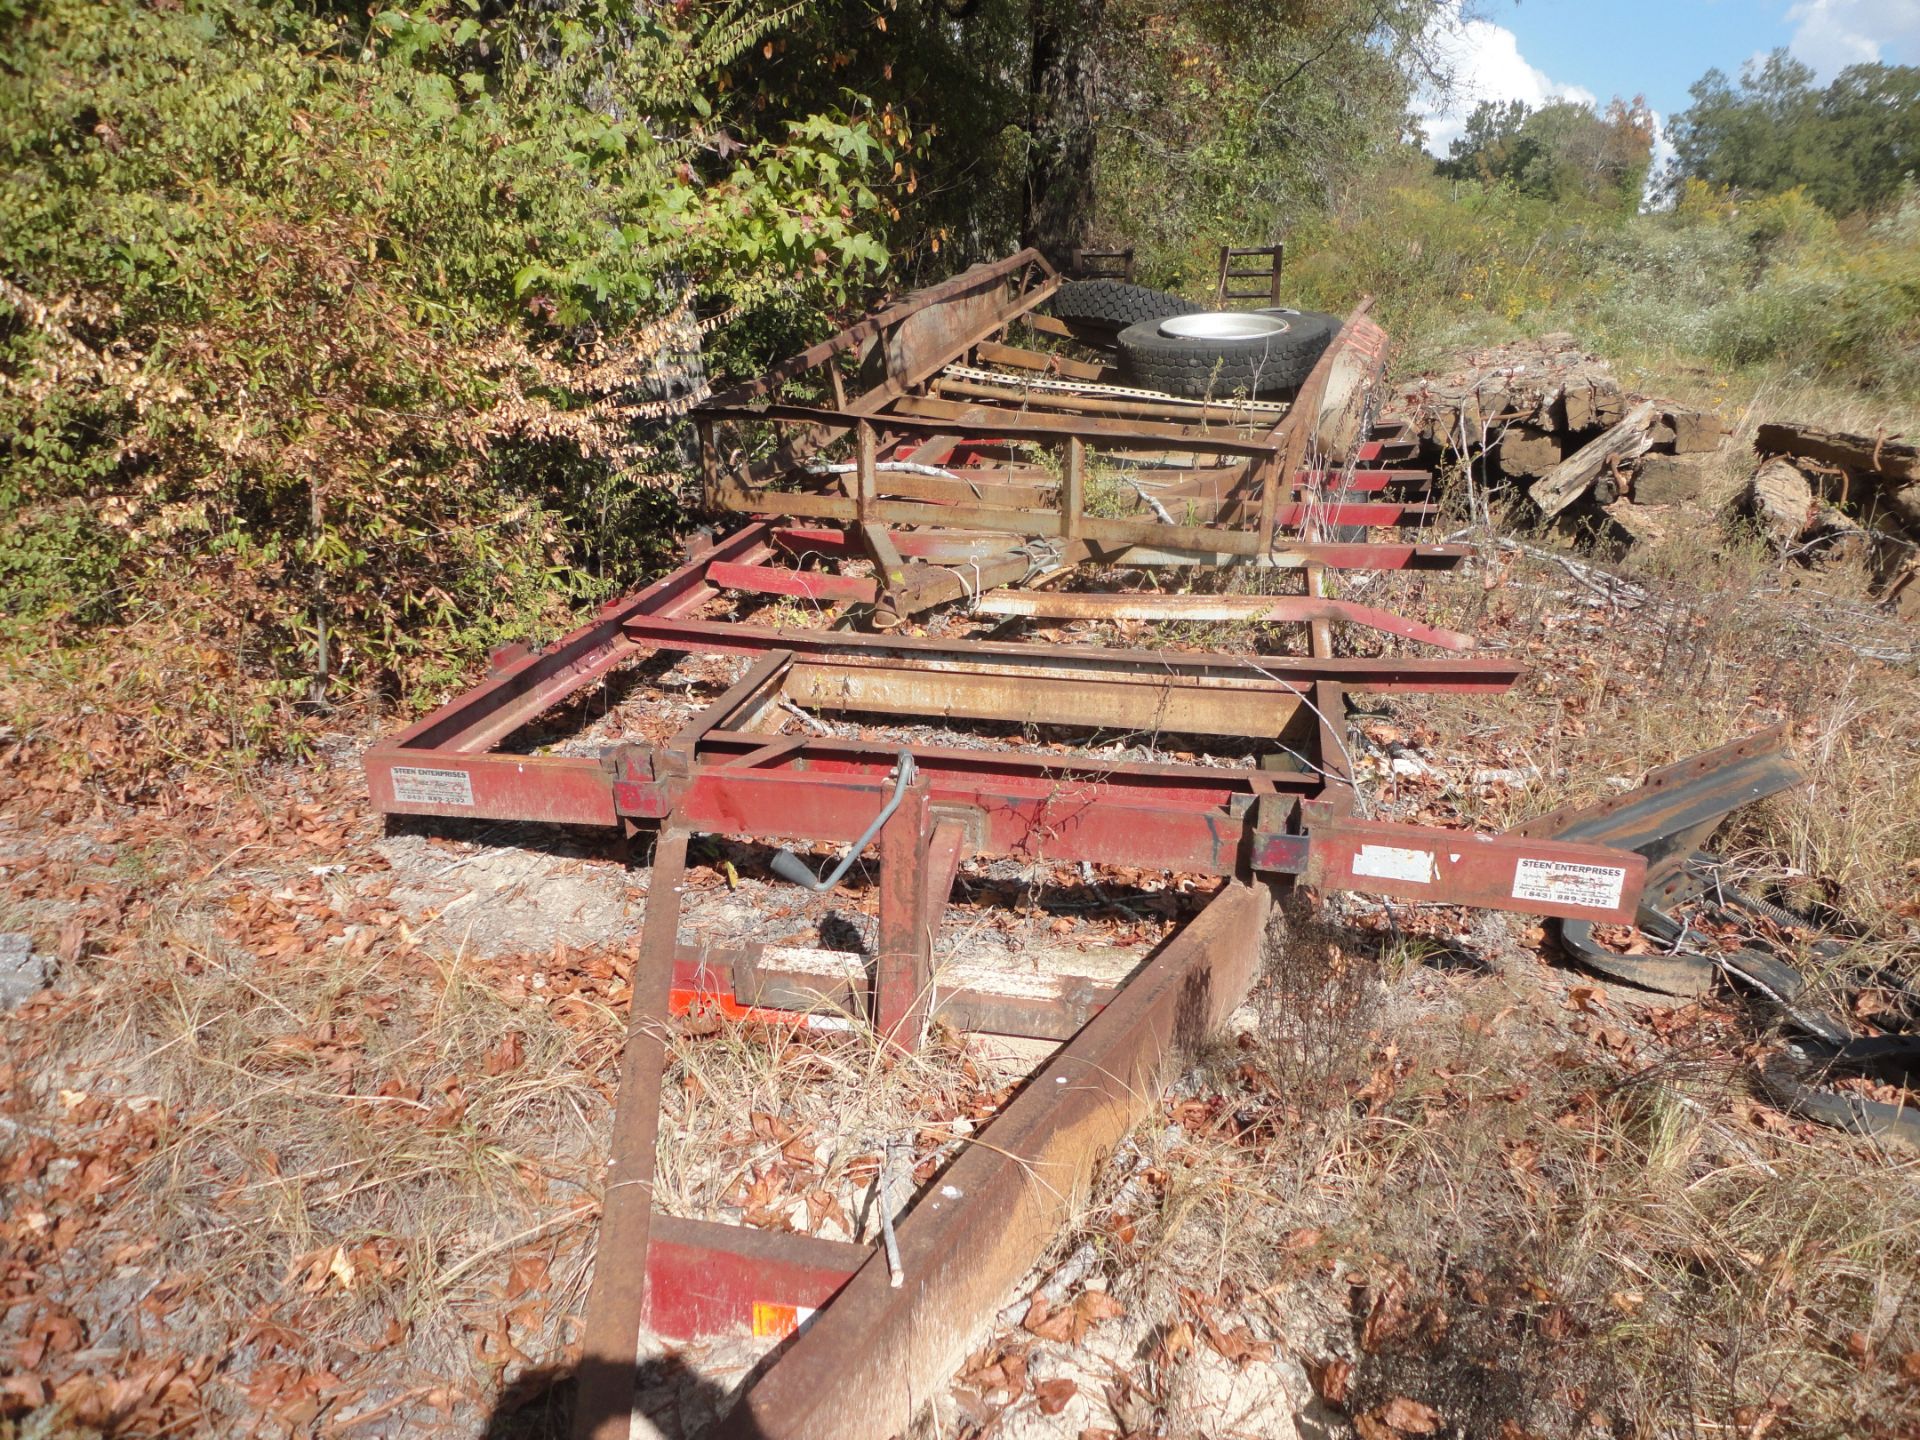 (LOT) (3) HITCH TRAILERS TANDEM AXLE OUT OF SERVICE UTILITY TRAILERS - Image 4 of 4